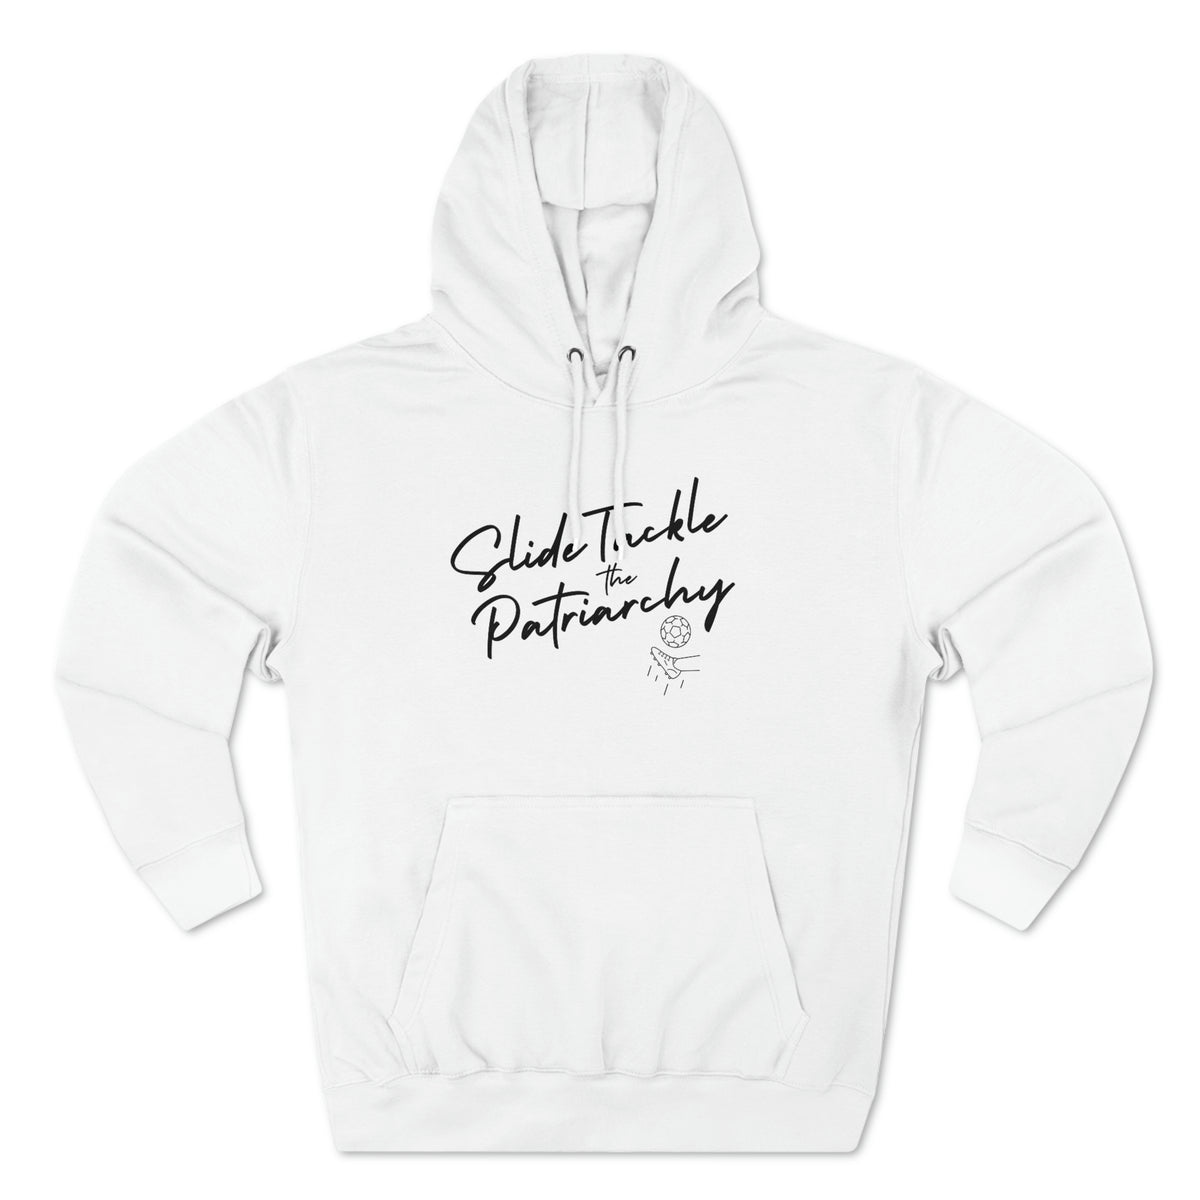 Slide Tackle The Patriarchy Adult Hooded Sweatshirt